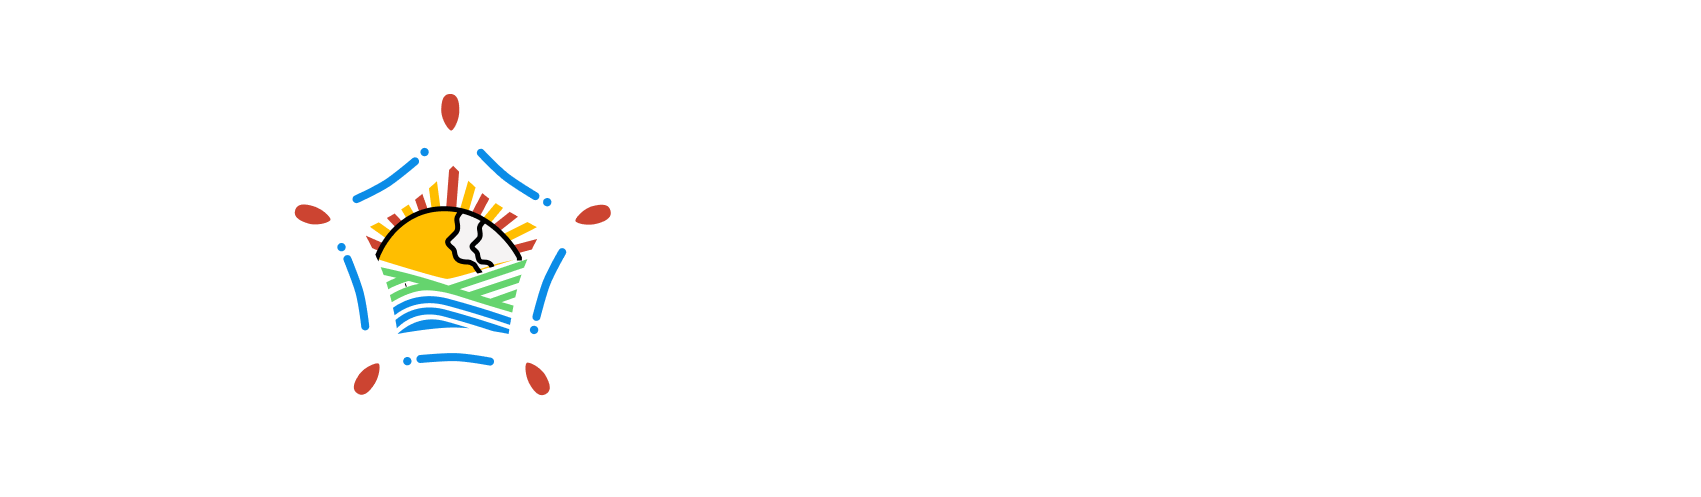 Right Energy Partnership with Indigenous Peoples